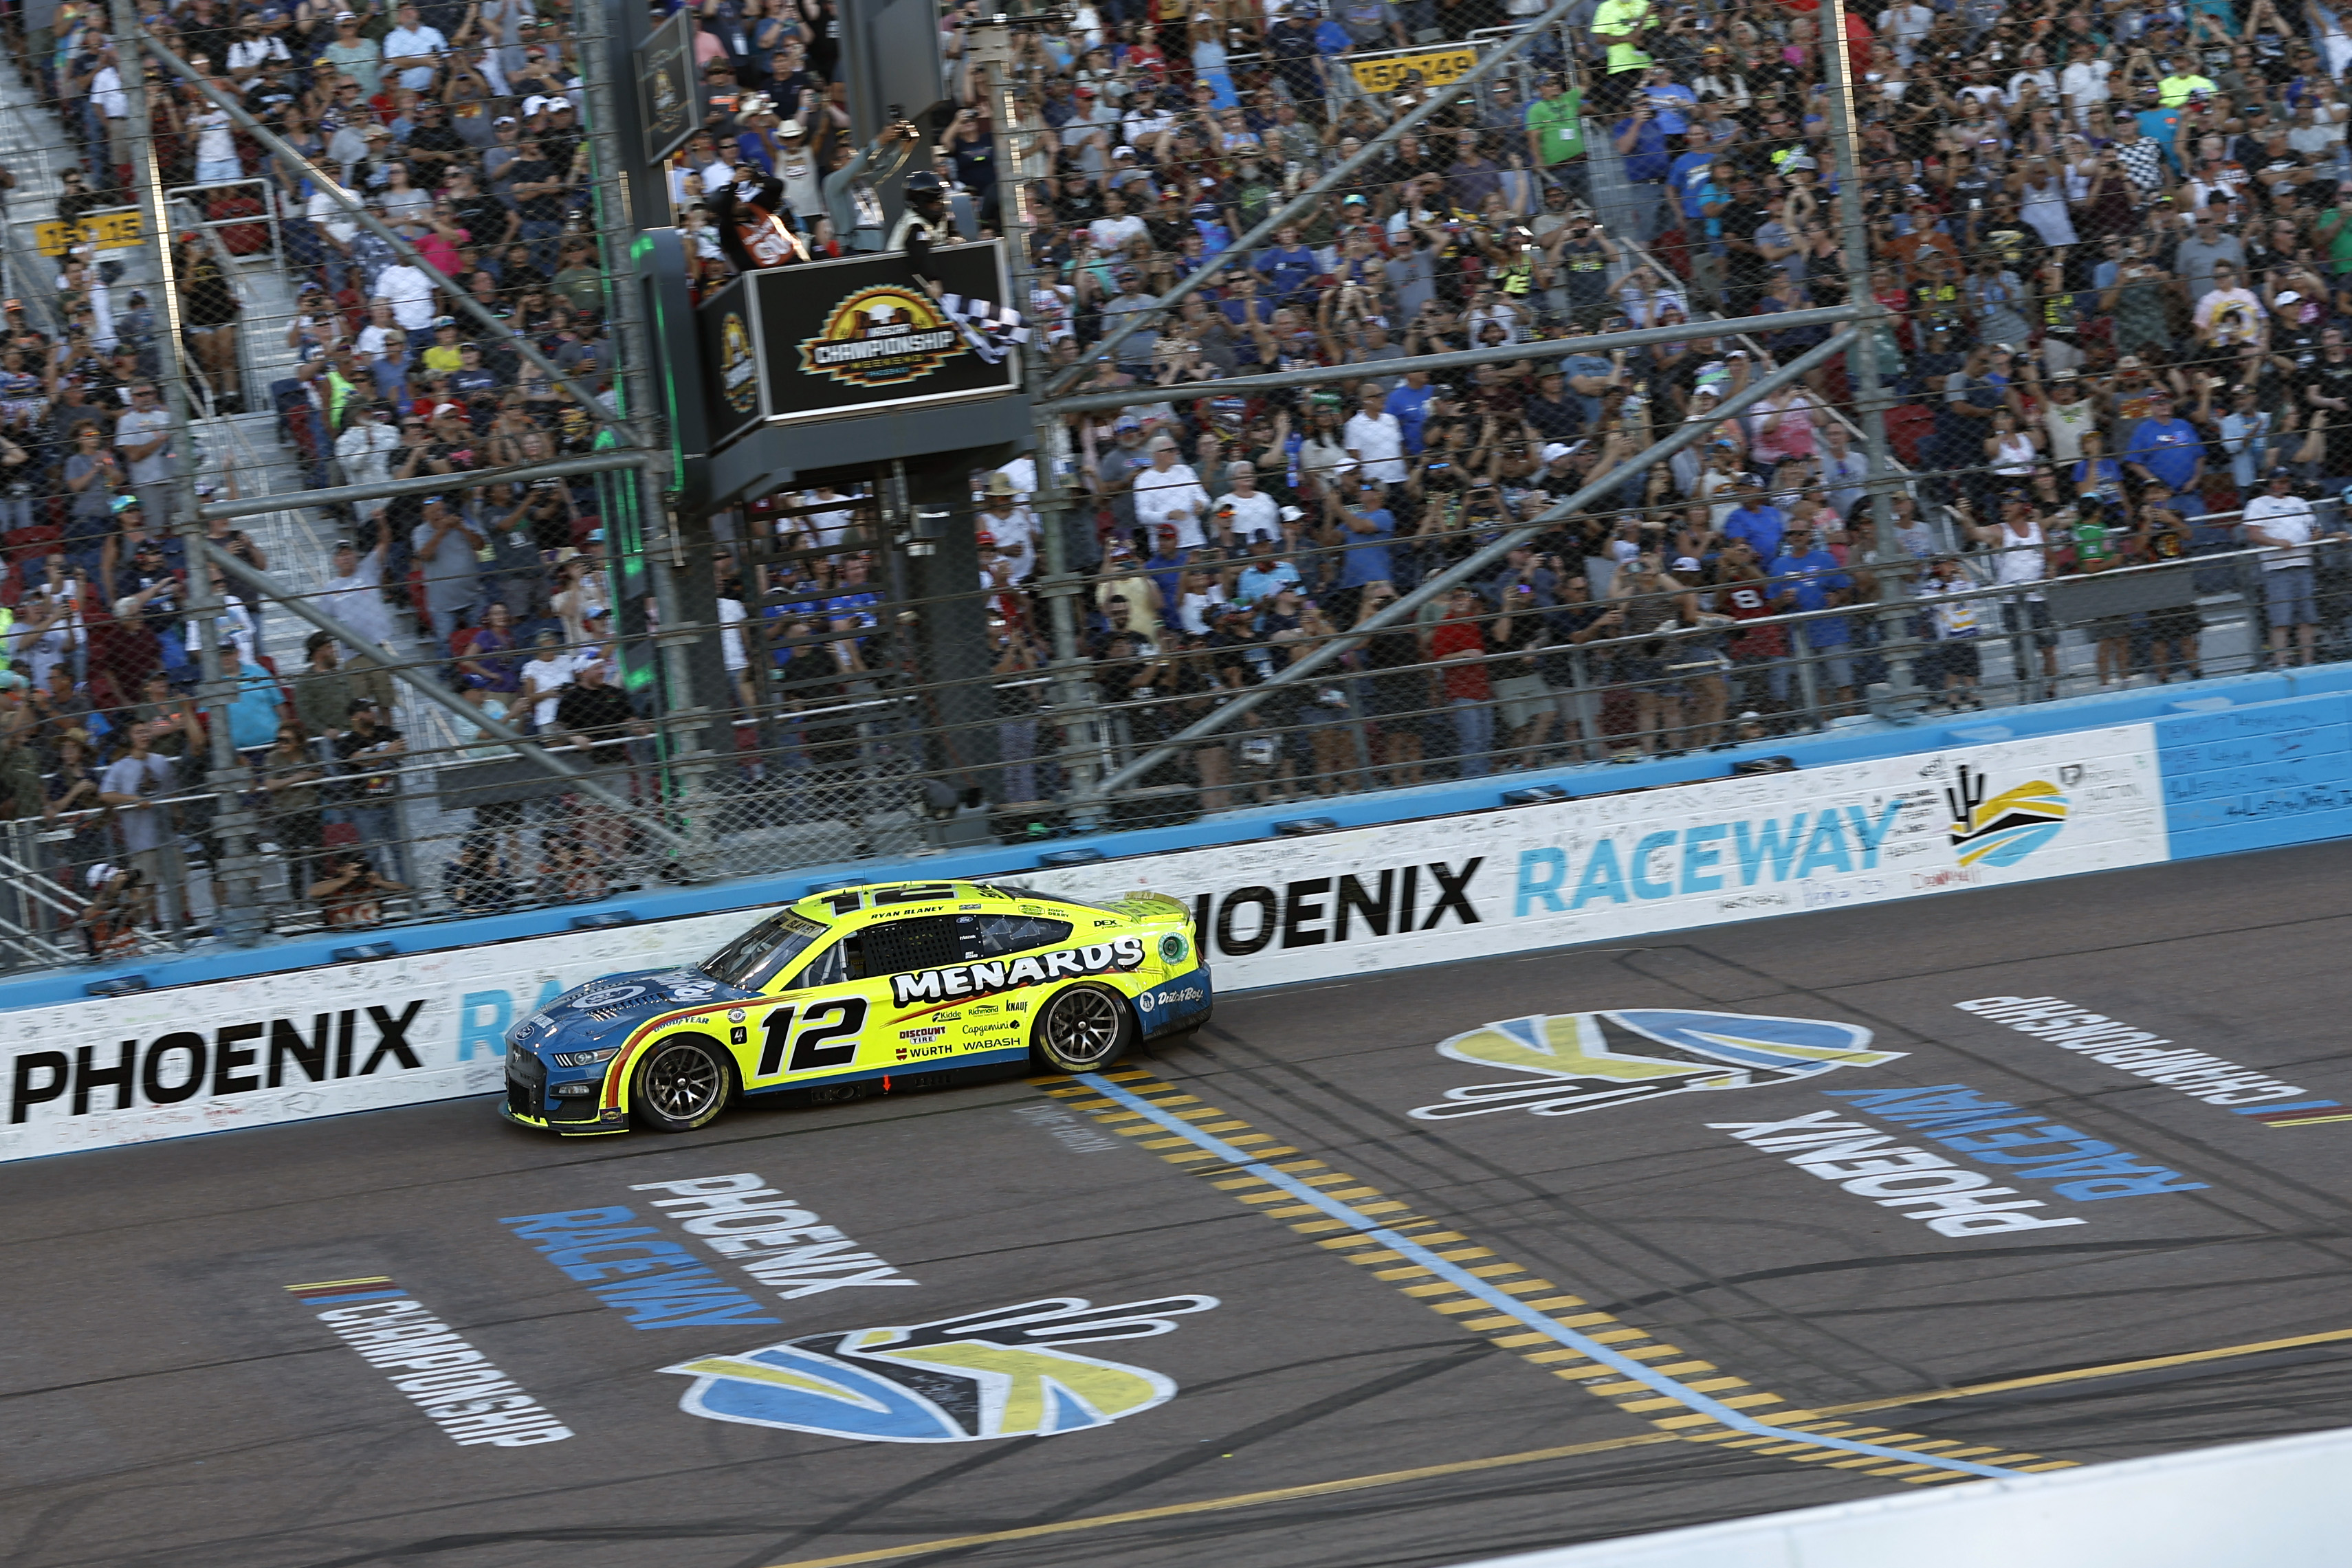 Ryan Blaney crosses the finish line to win the 2023 NASCAR Cup Series Championship, finishing first of the Championship 4 drivers Sunday at Phoenix Raceway. (Photo by Chris Graythen/Getty Images)